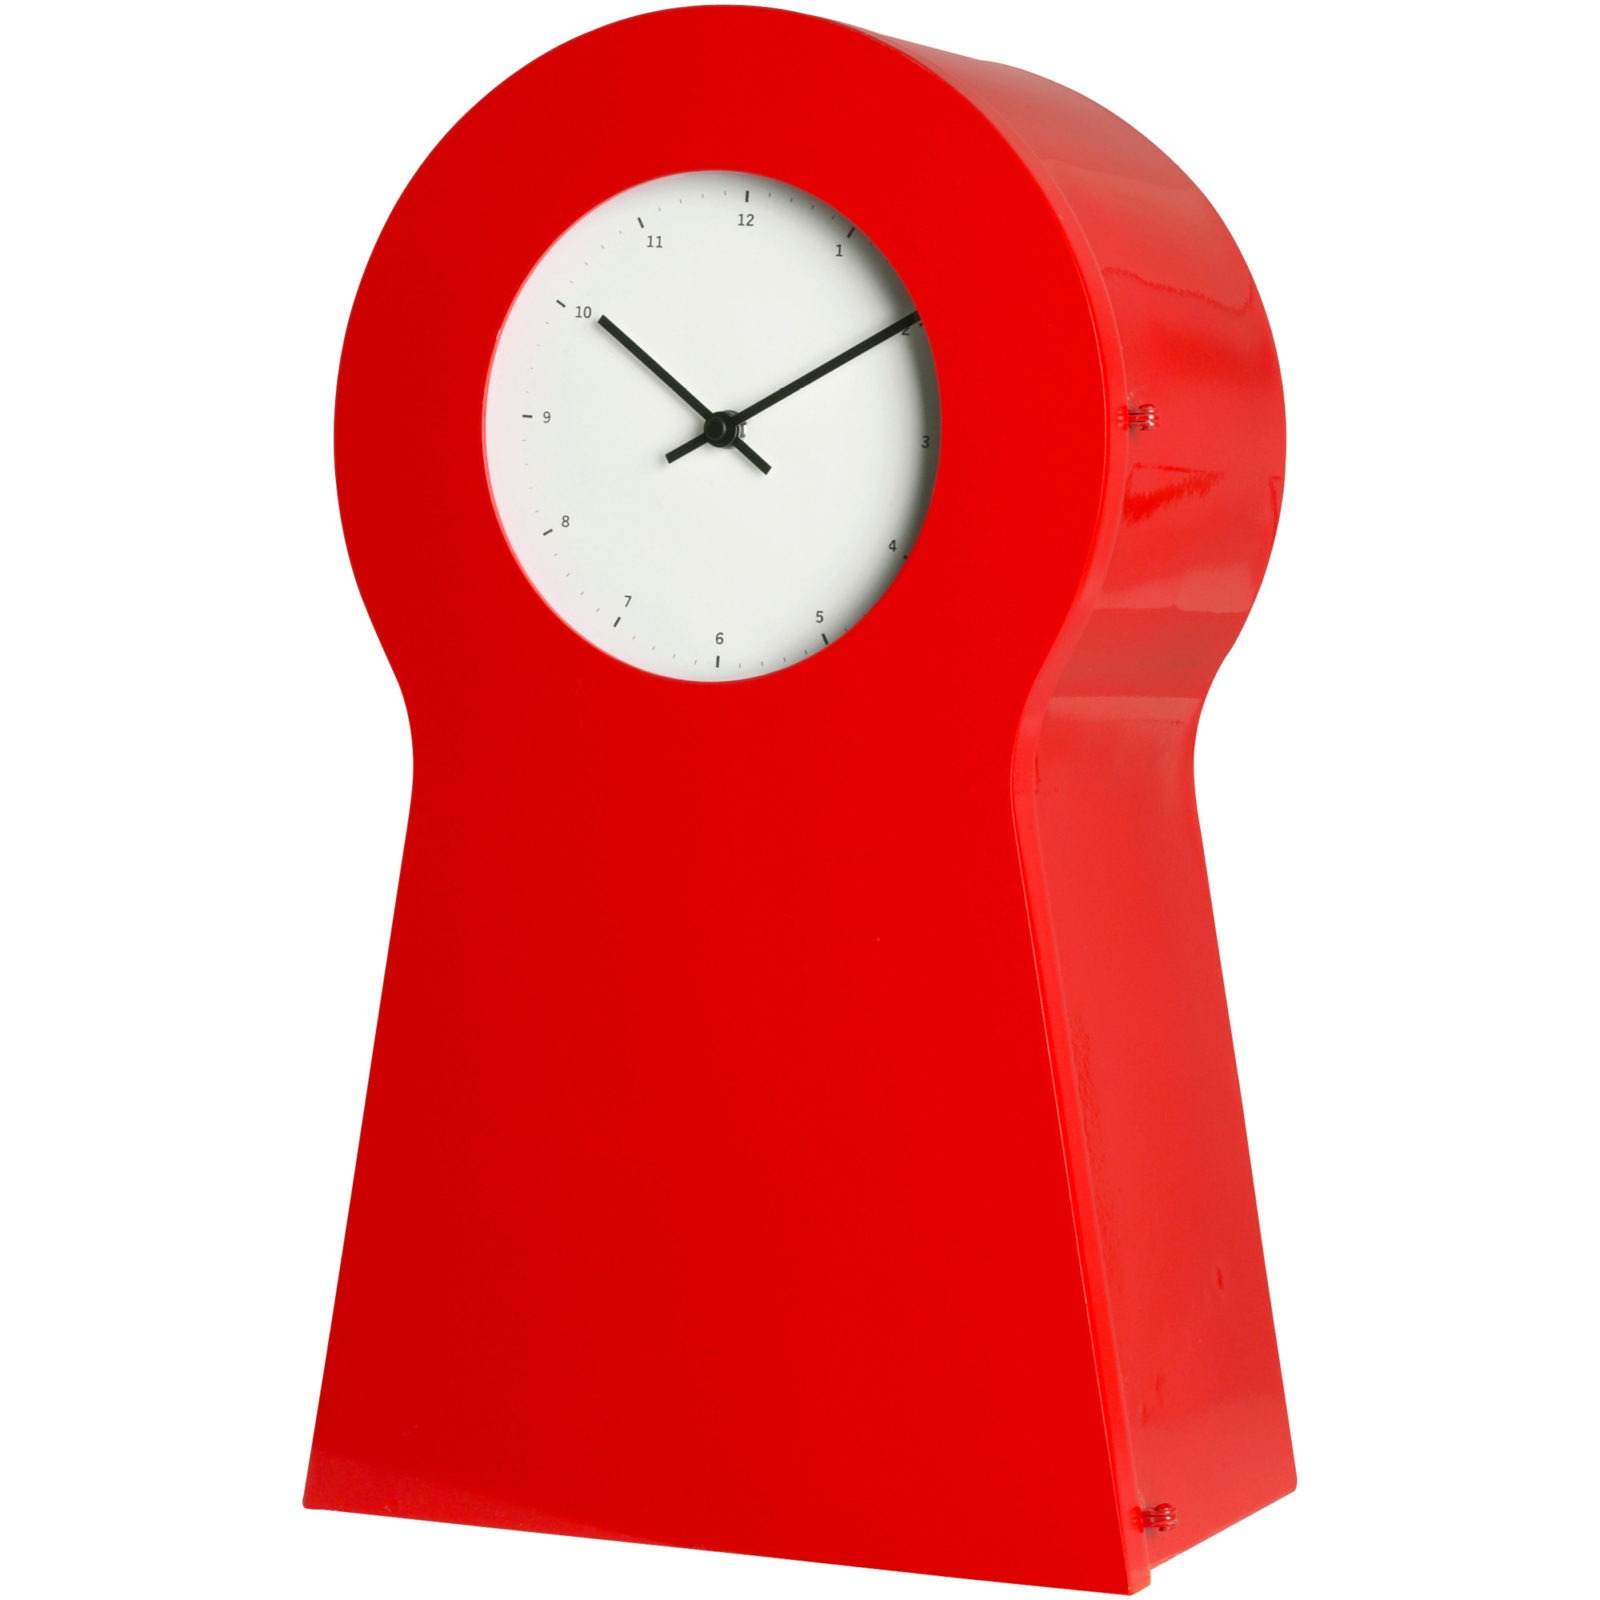 A small, slightly plump, red keyhole-shaped table clock.